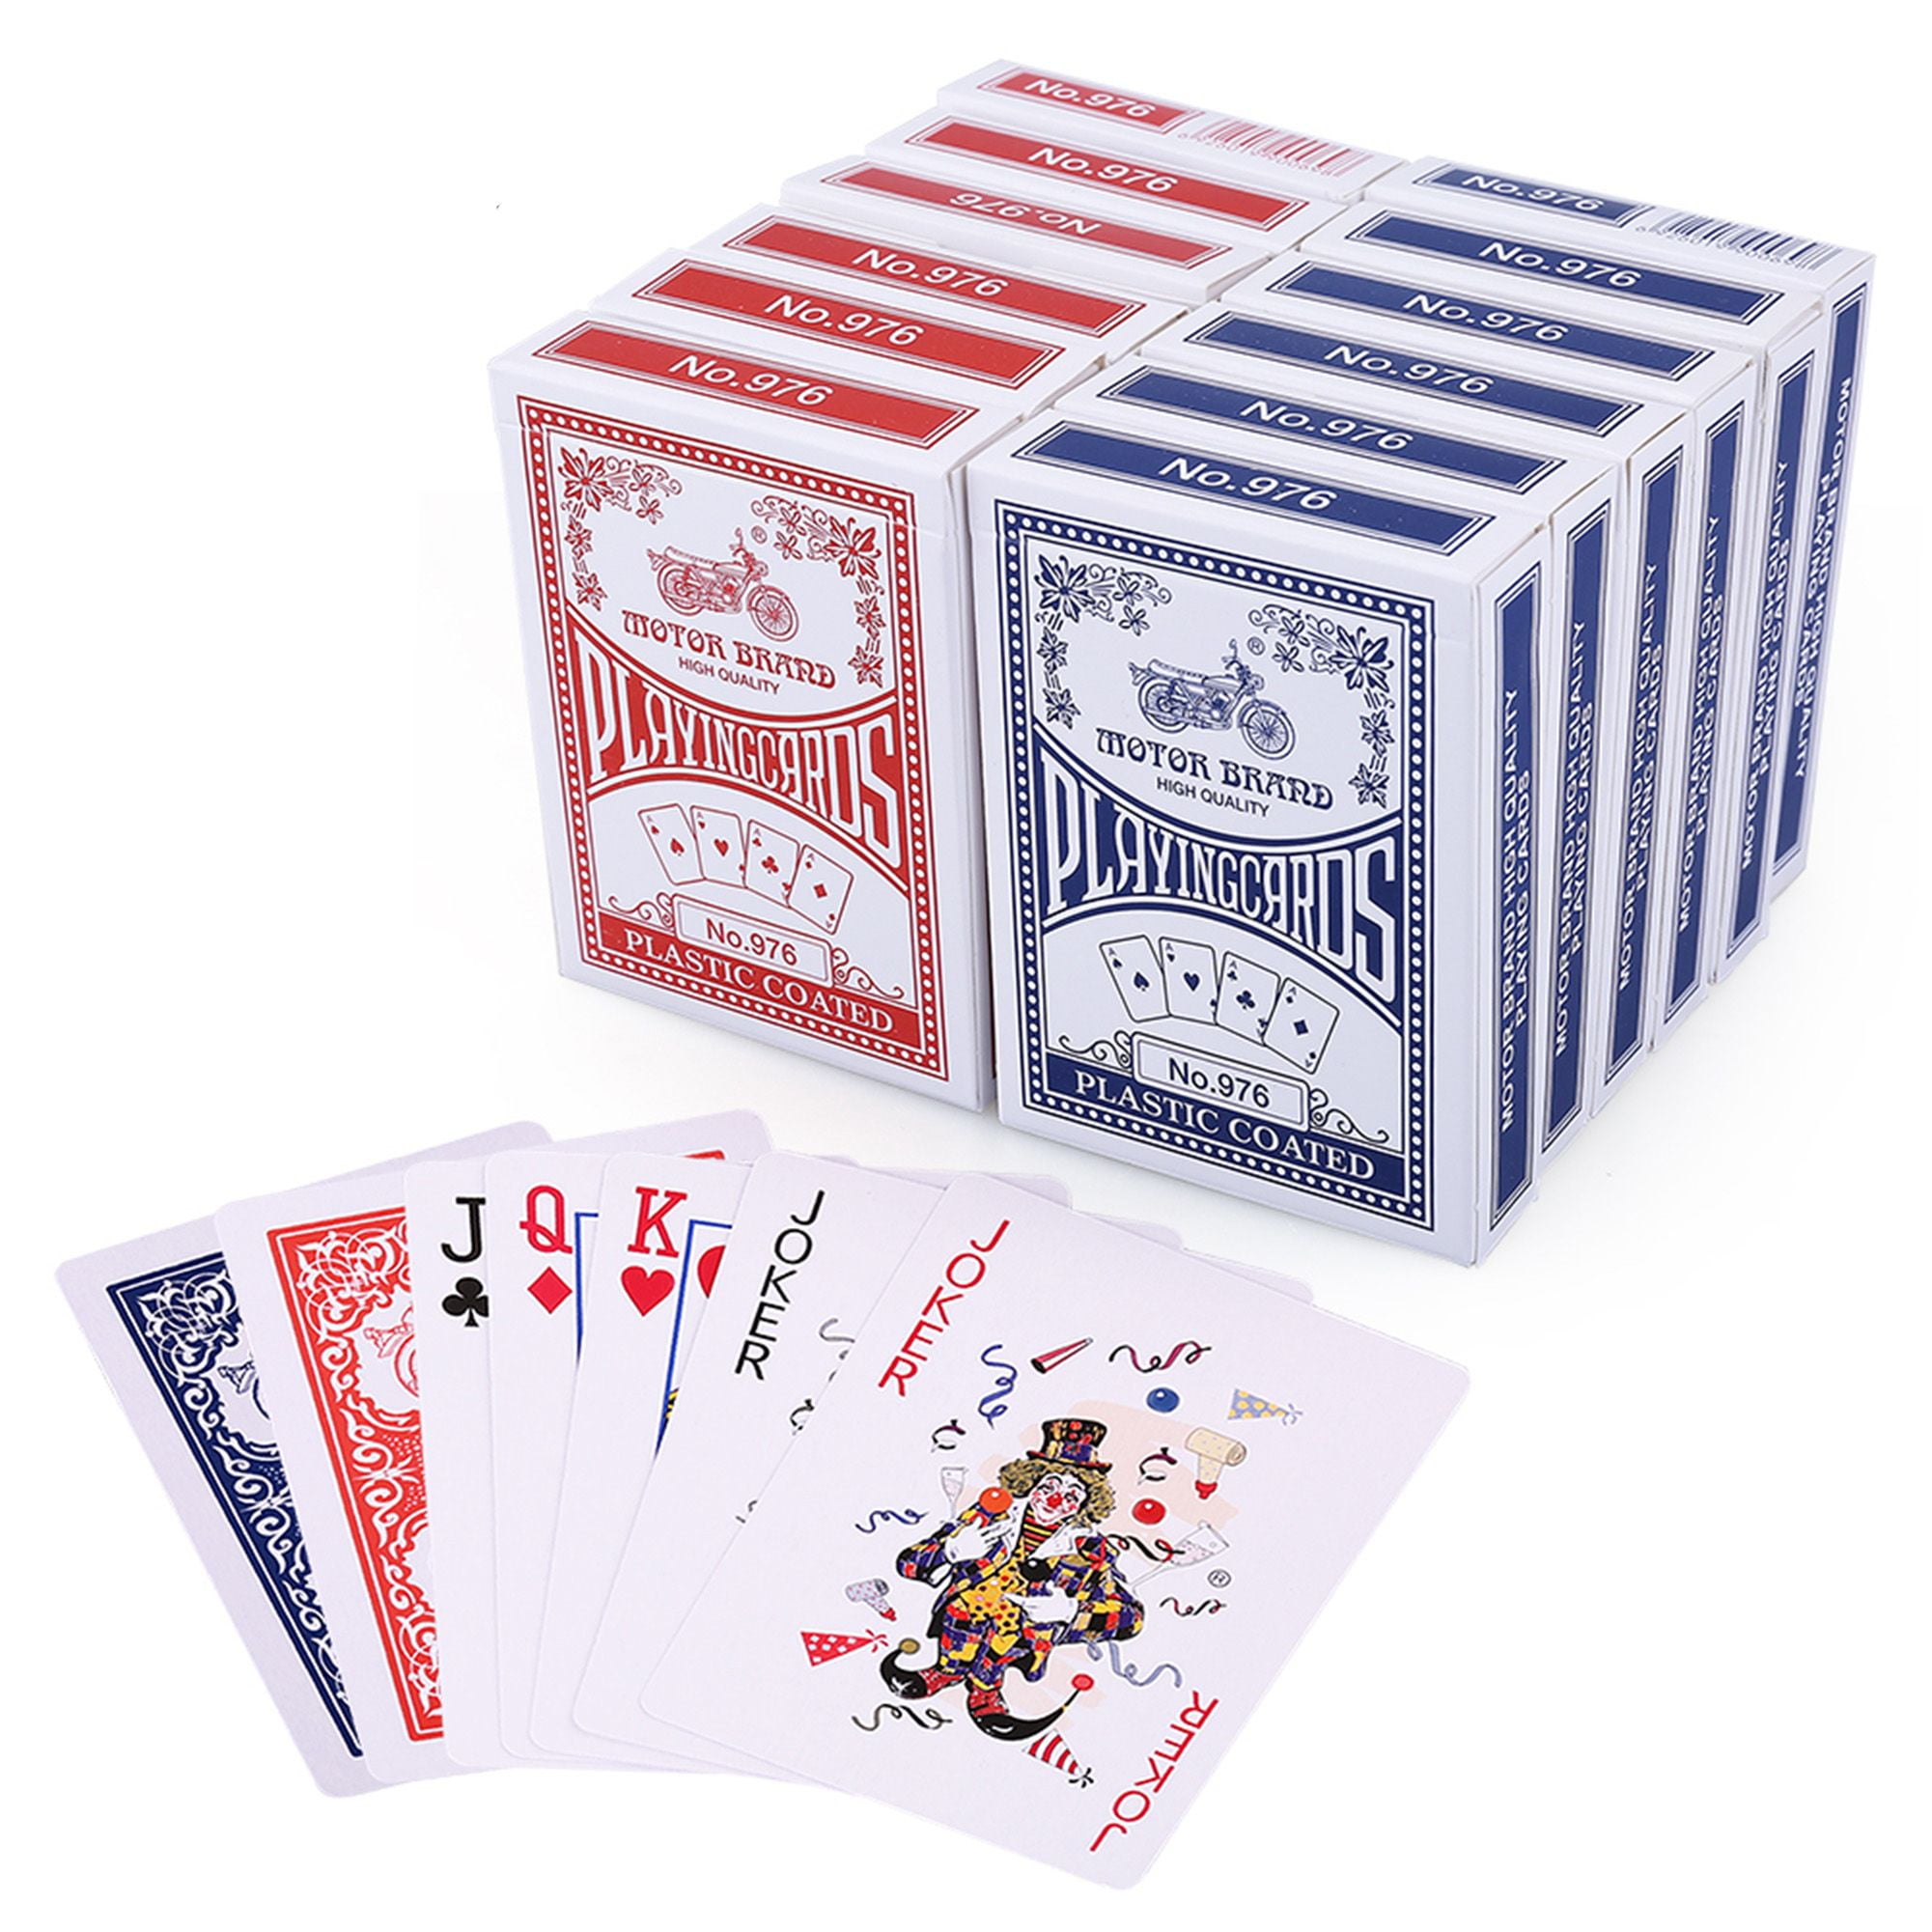 BEE JUMBO INDEX playing cards deck jumbo index red color plastic coated paper playing Air-Cushion finish magic tricks casino game cards new